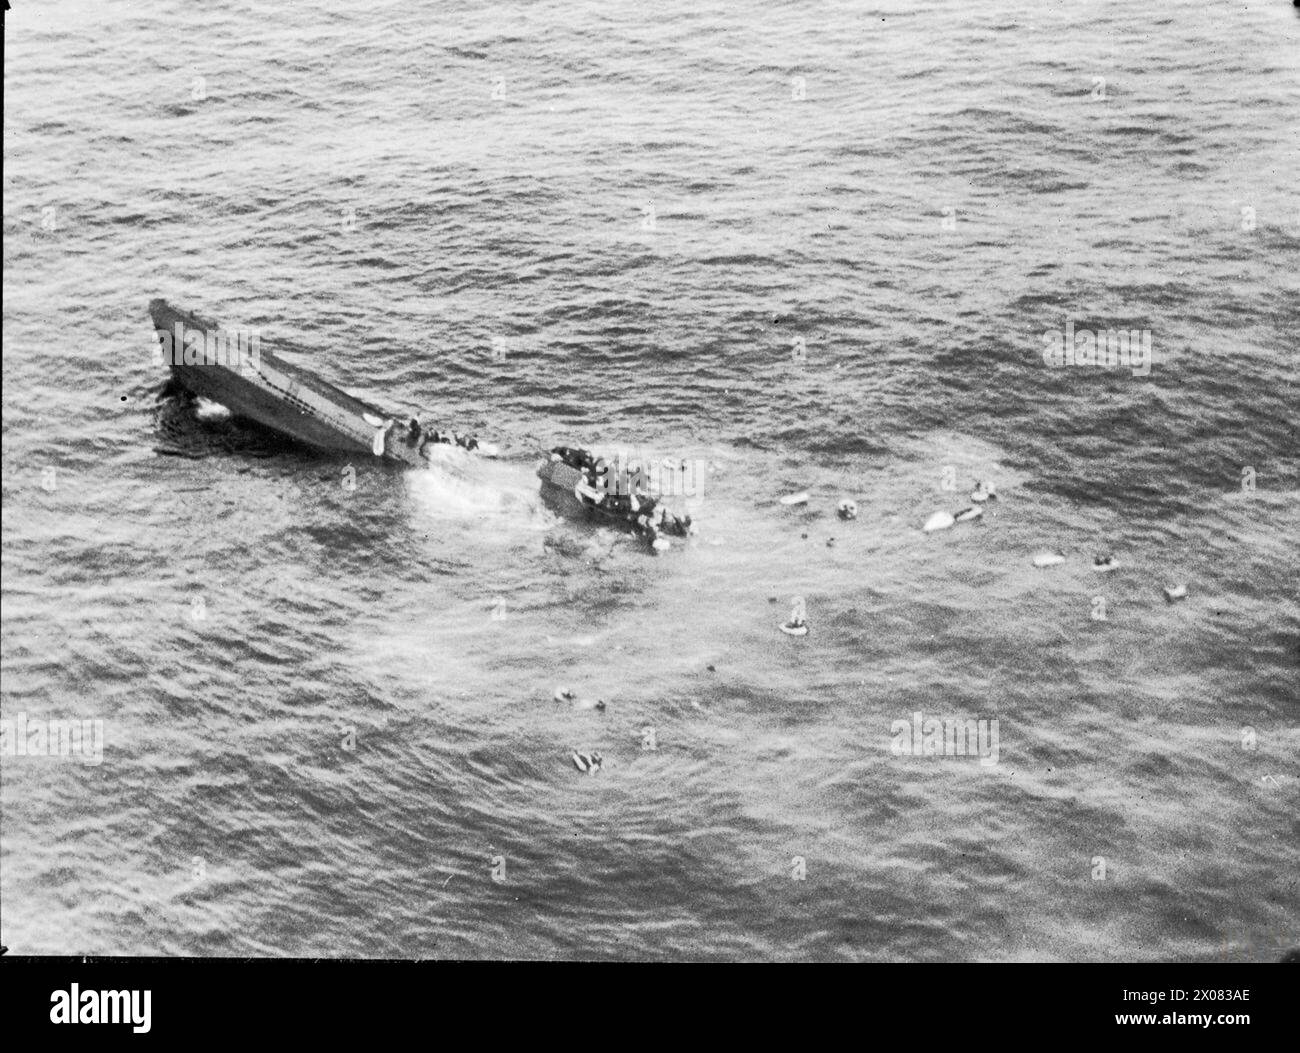 ROYAL AIR FORCE COASTAL COMMAND, 1939-1945. - Low-level oblique photograph taken from Short Sunderland Mark III, EK591 'U', of No. 422 Squadron RCAF after attacking German type VIIC submarine U-625 in the Atlantic Ocean. The crew of the U-boat take to their dinghies as the submarine sinks by the stern some one and a half hours after being depth-charged by the Sunderland  Royal Canadian Air Force, 422 Squadron, German Navy (Third Reich), U-625 Stock Photo